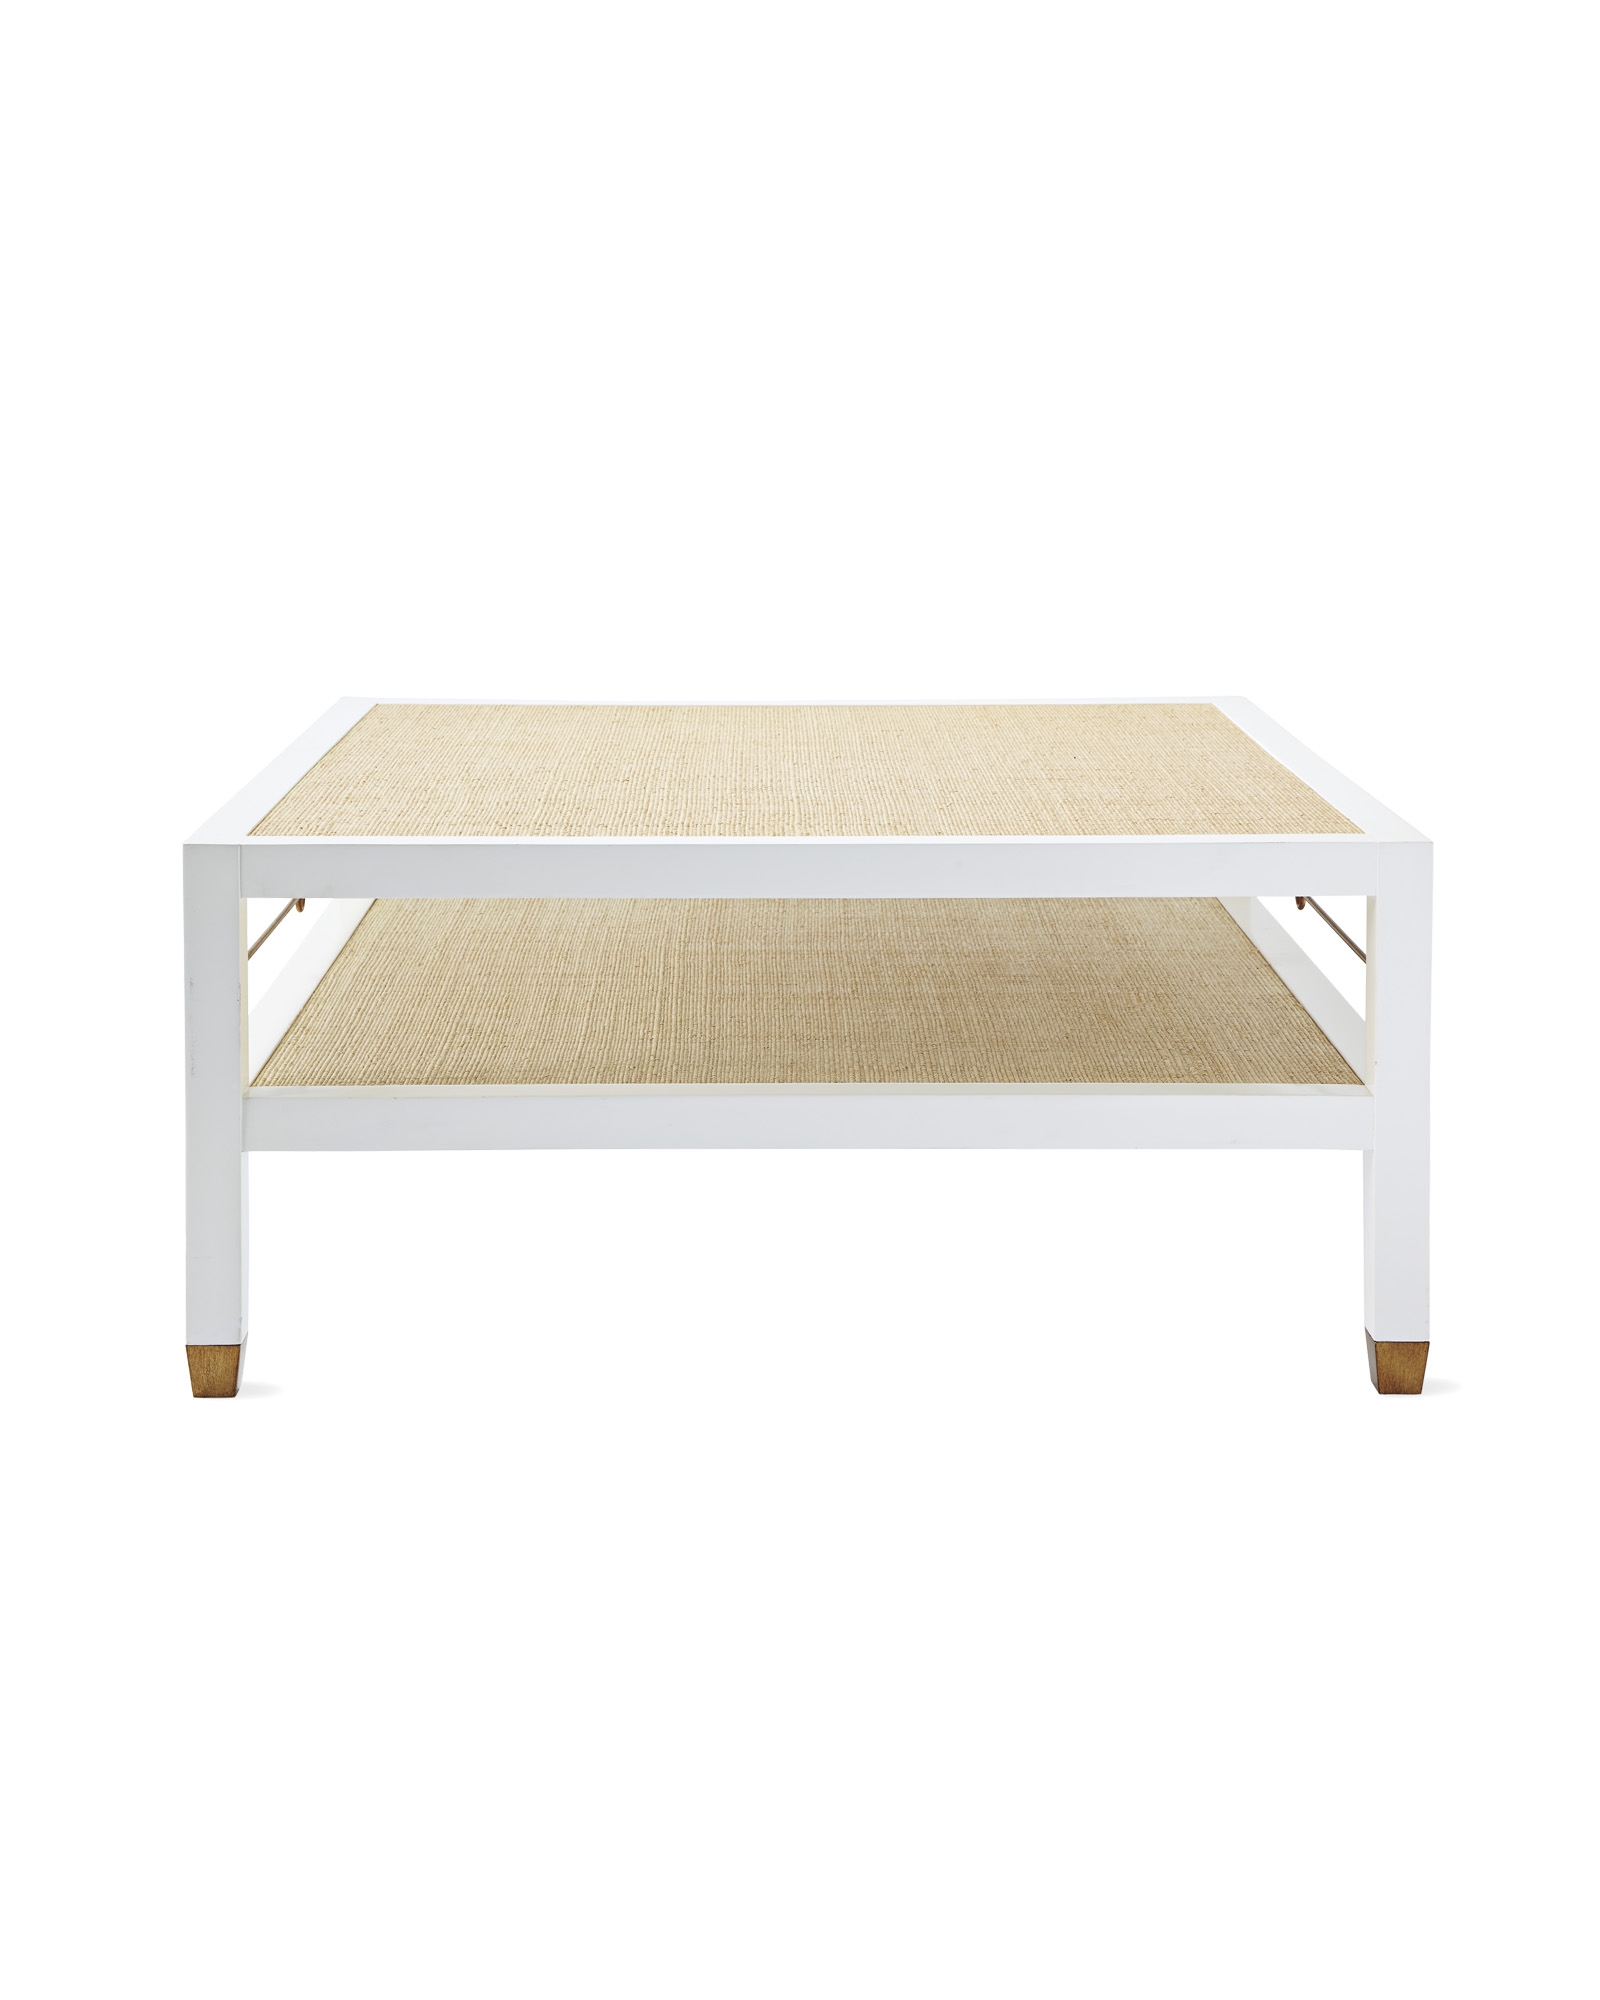 Cabot Square Coffee Table - White - Image 2